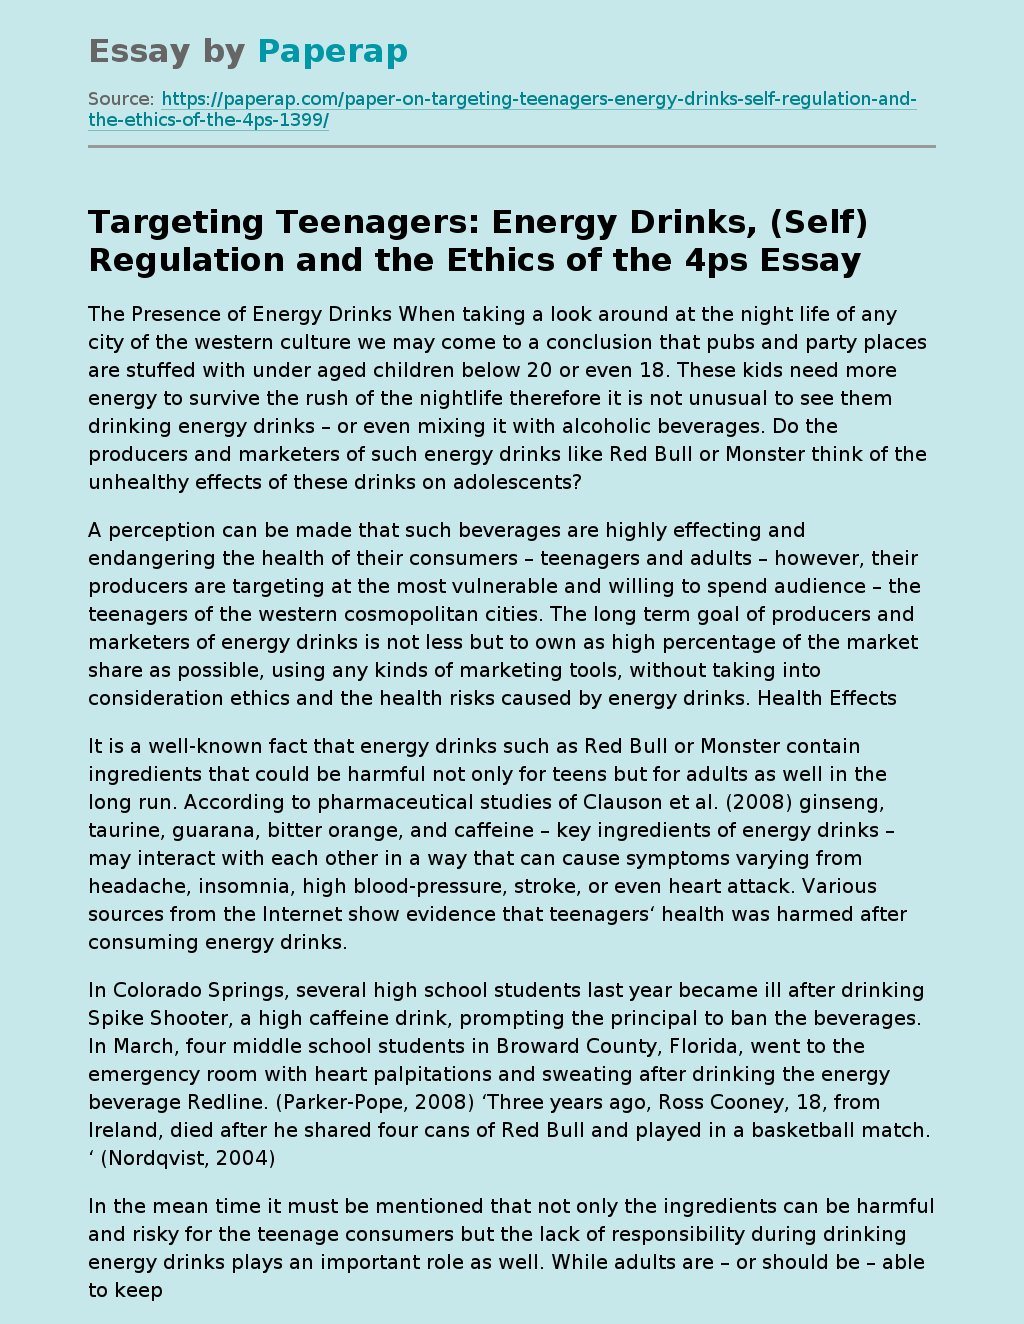 Targeting Teenagers: Energy Drinks, (Self) Regulation and the Ethics of the 4ps